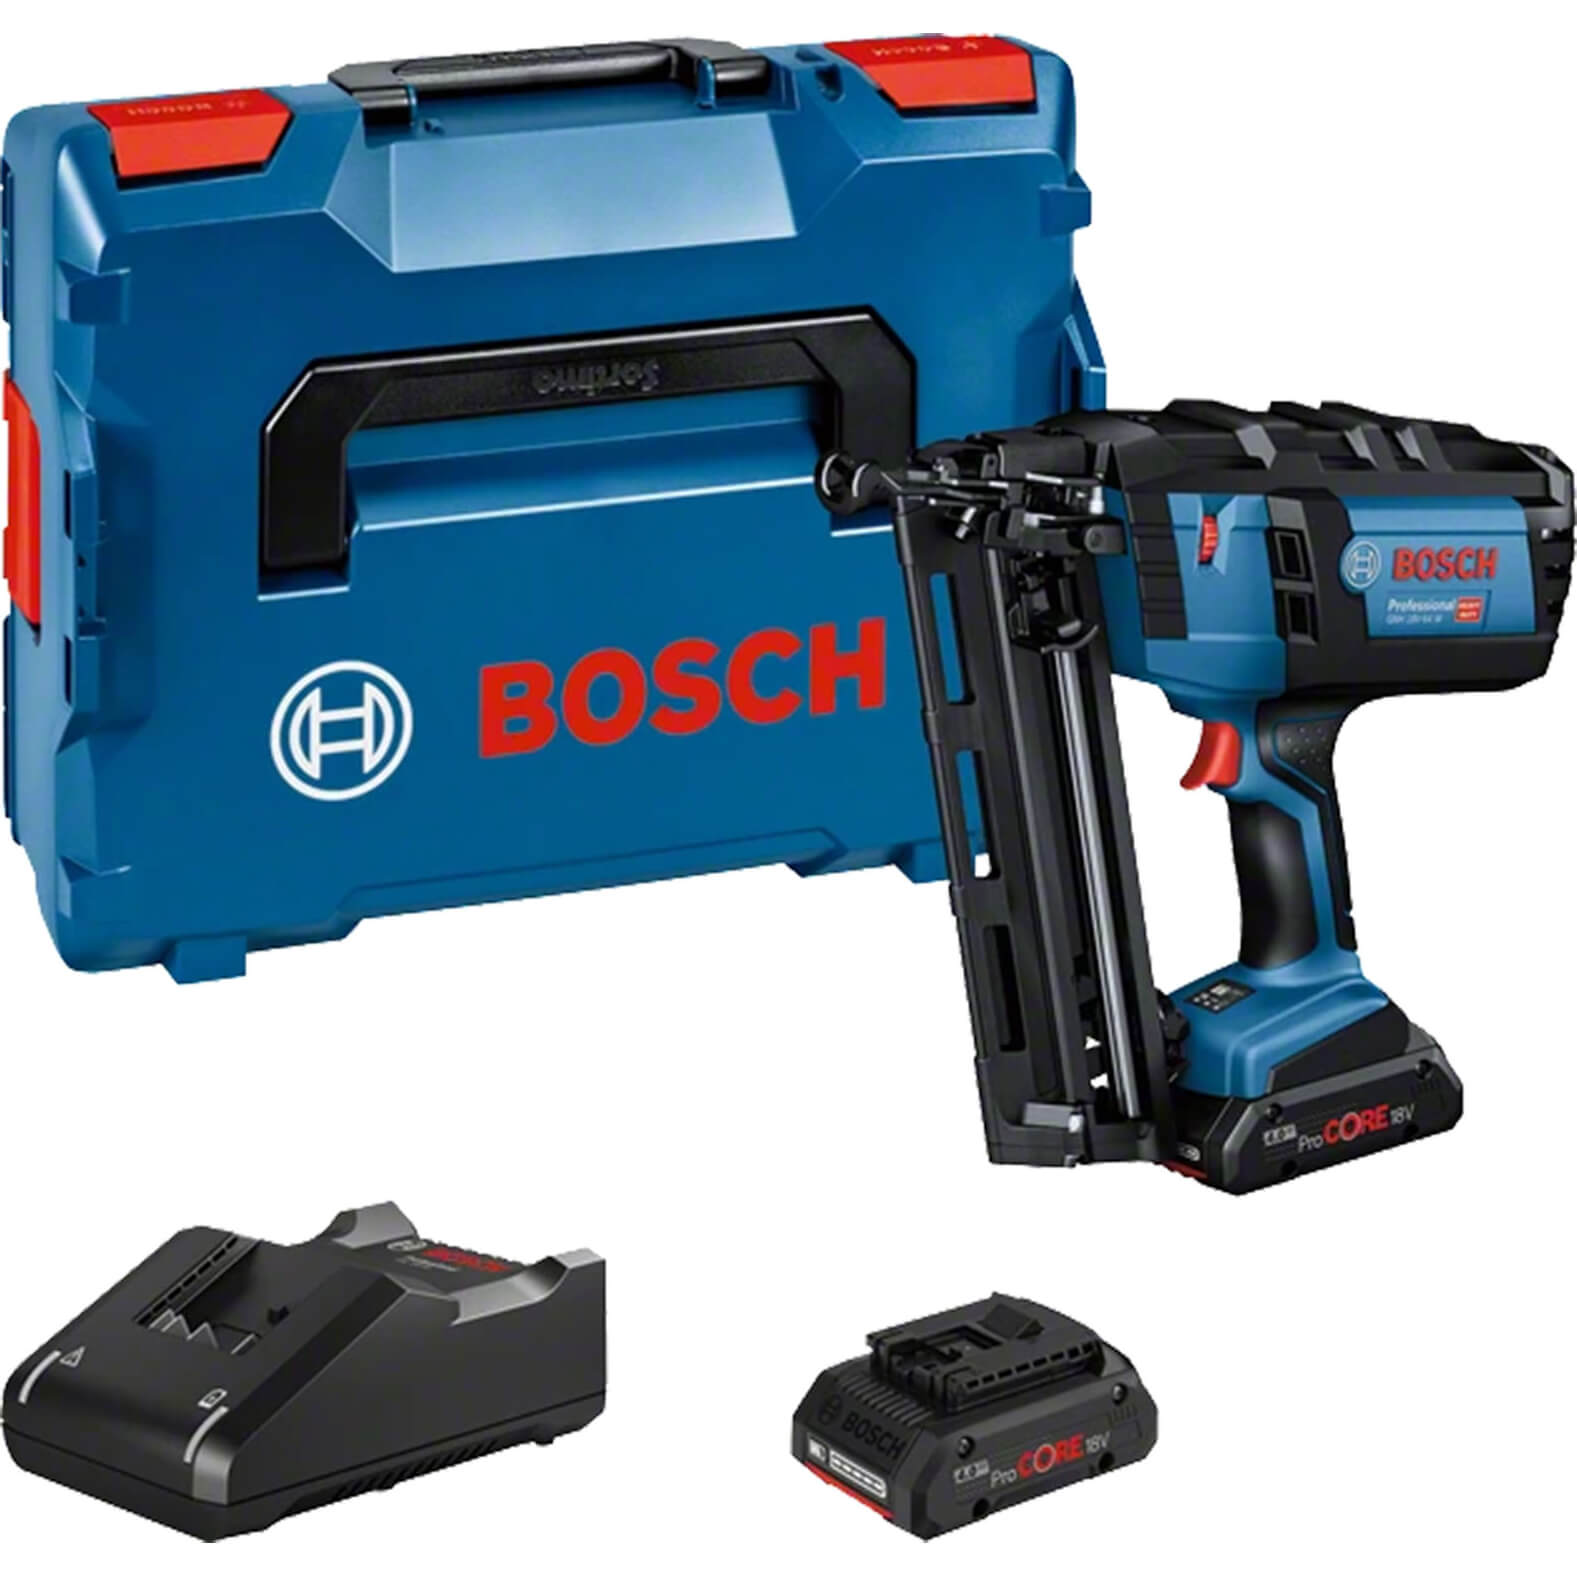 What's the difference between a framing nailer and a first fix nail gun?  Thinking of getting one, but not sure which to get, I'll be doing a wide  range of first fix